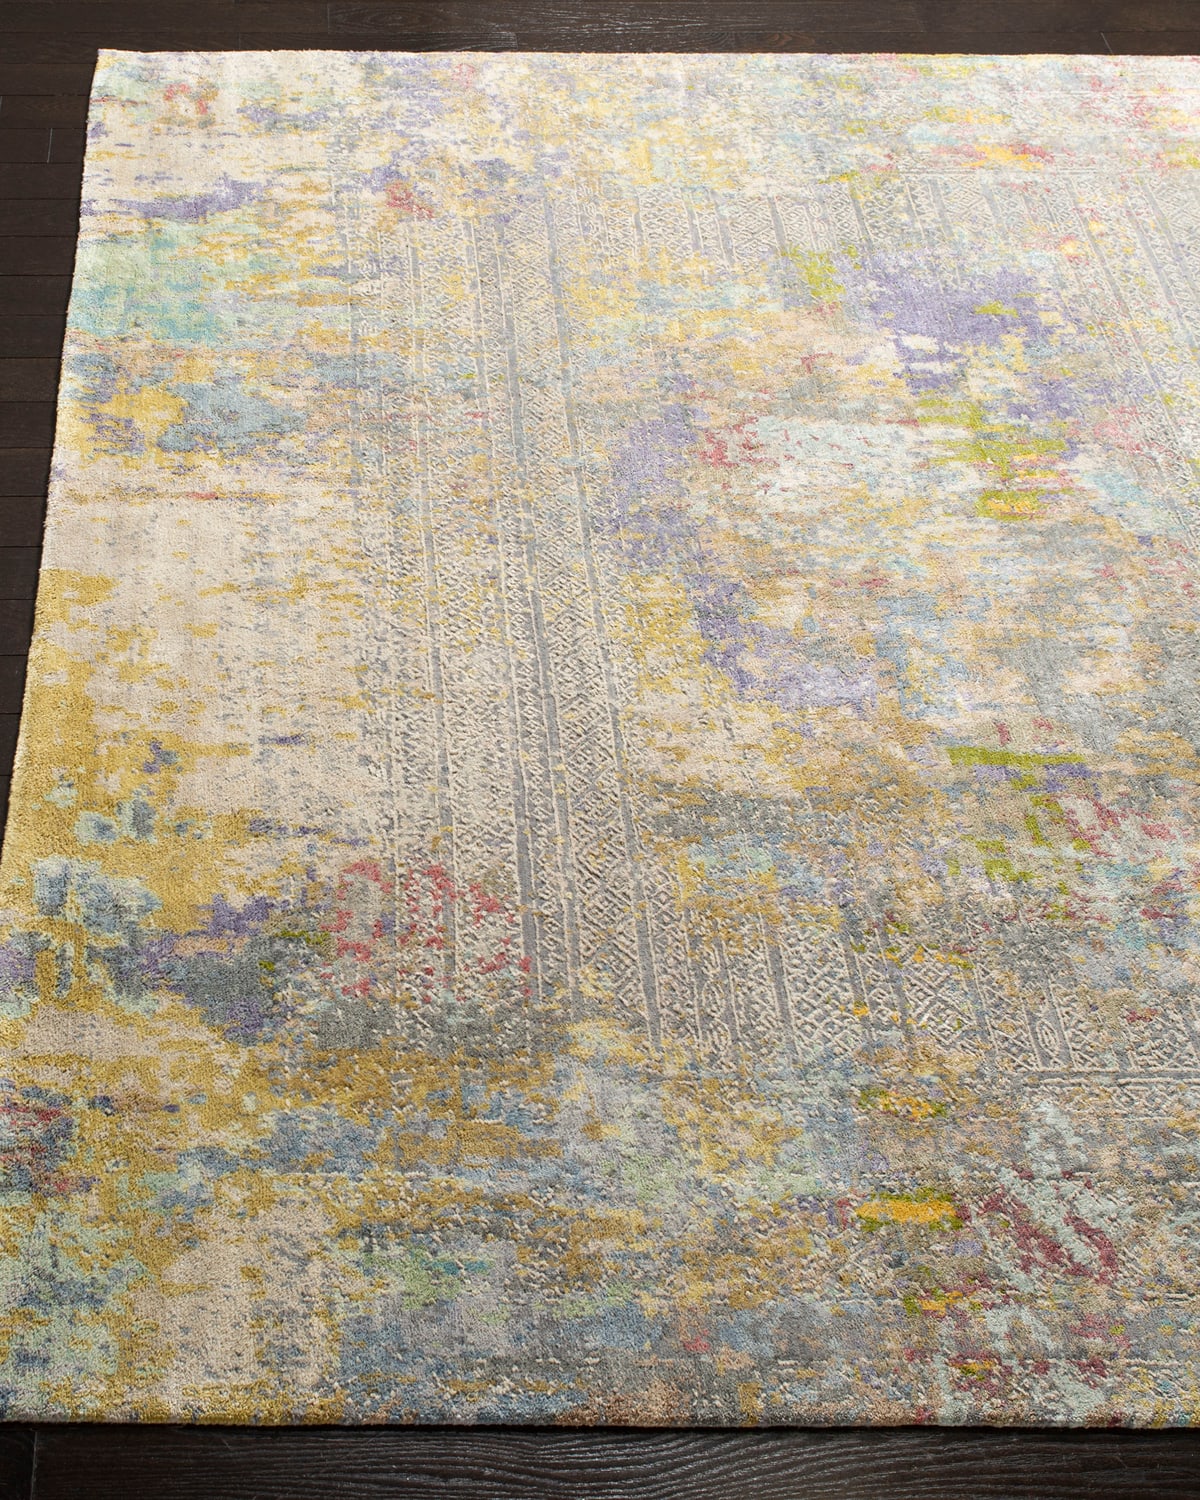 Weston Hand-Knotted Wool Rug, 8' x 10'